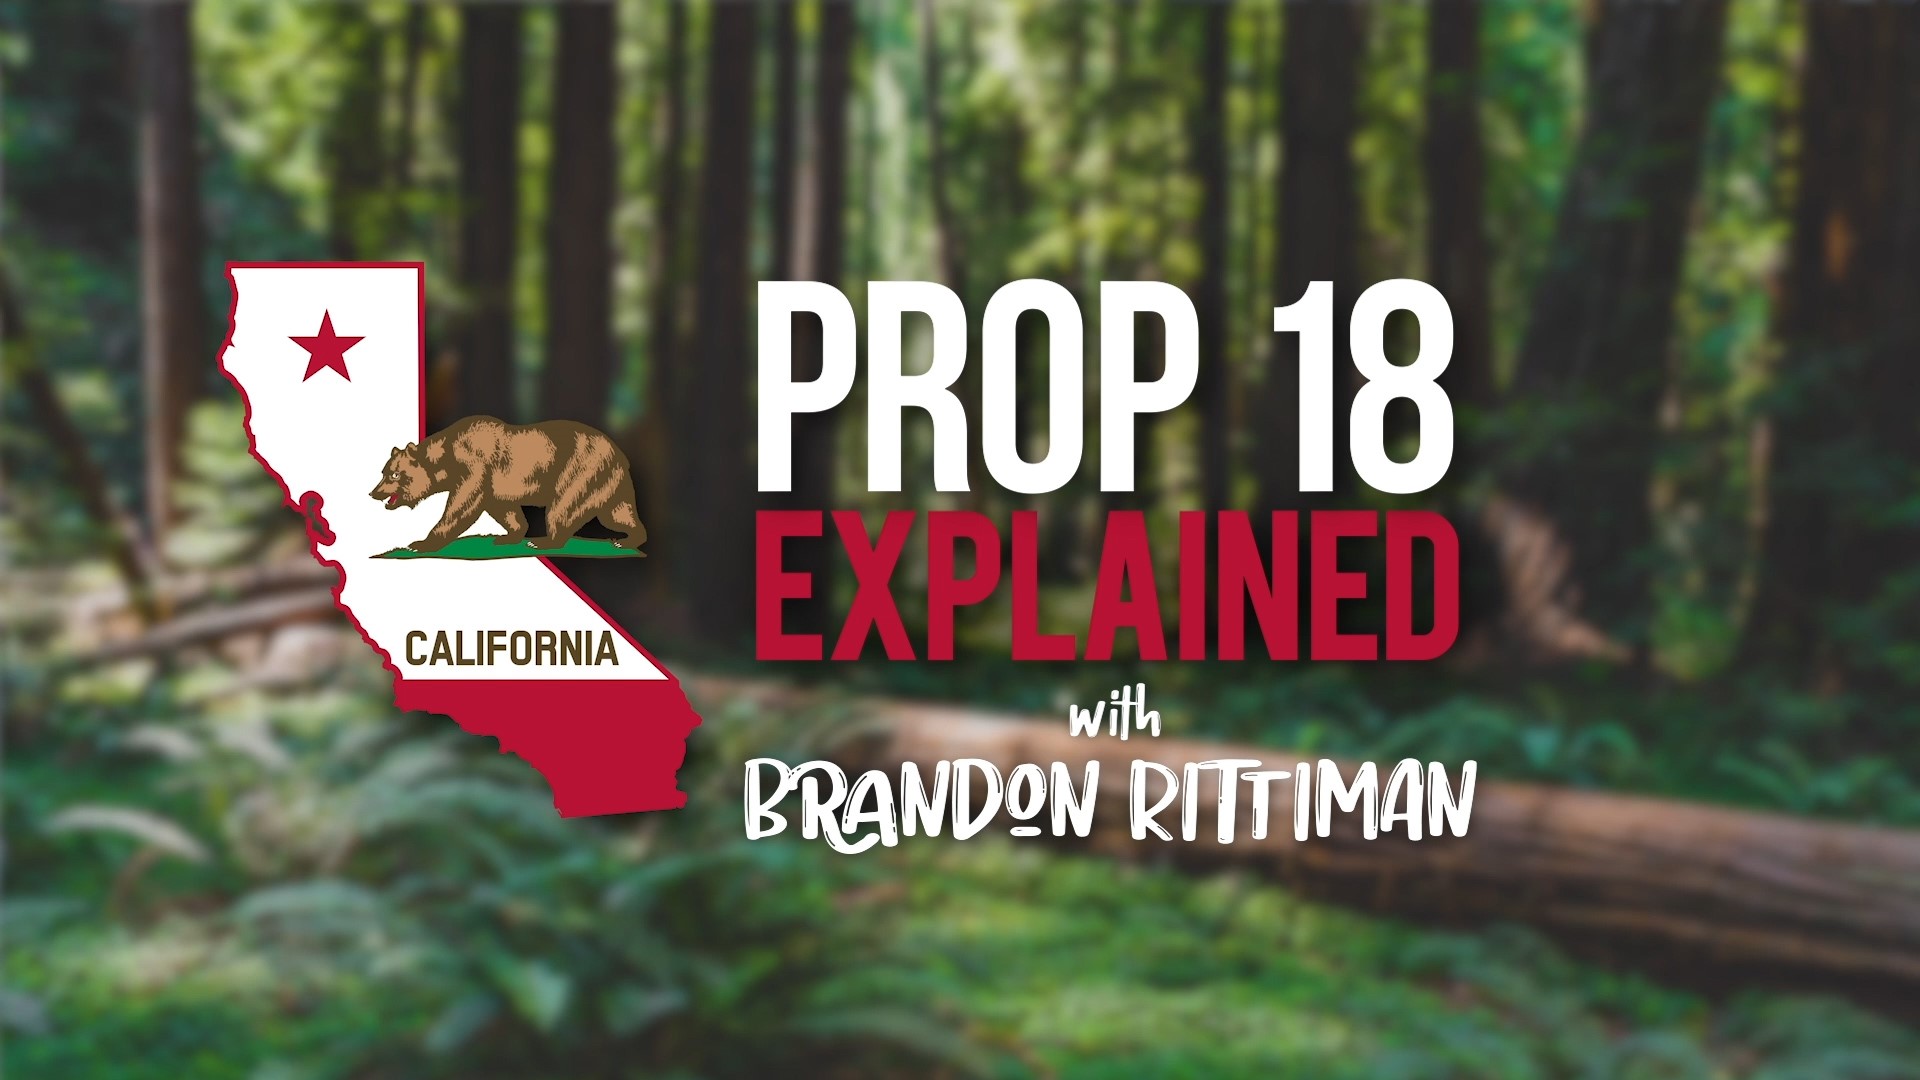 ABC10's Brandon Rittiman takes a closer look at California Proposition 18, Primary Voting for 17-Year-Olds Amendment.